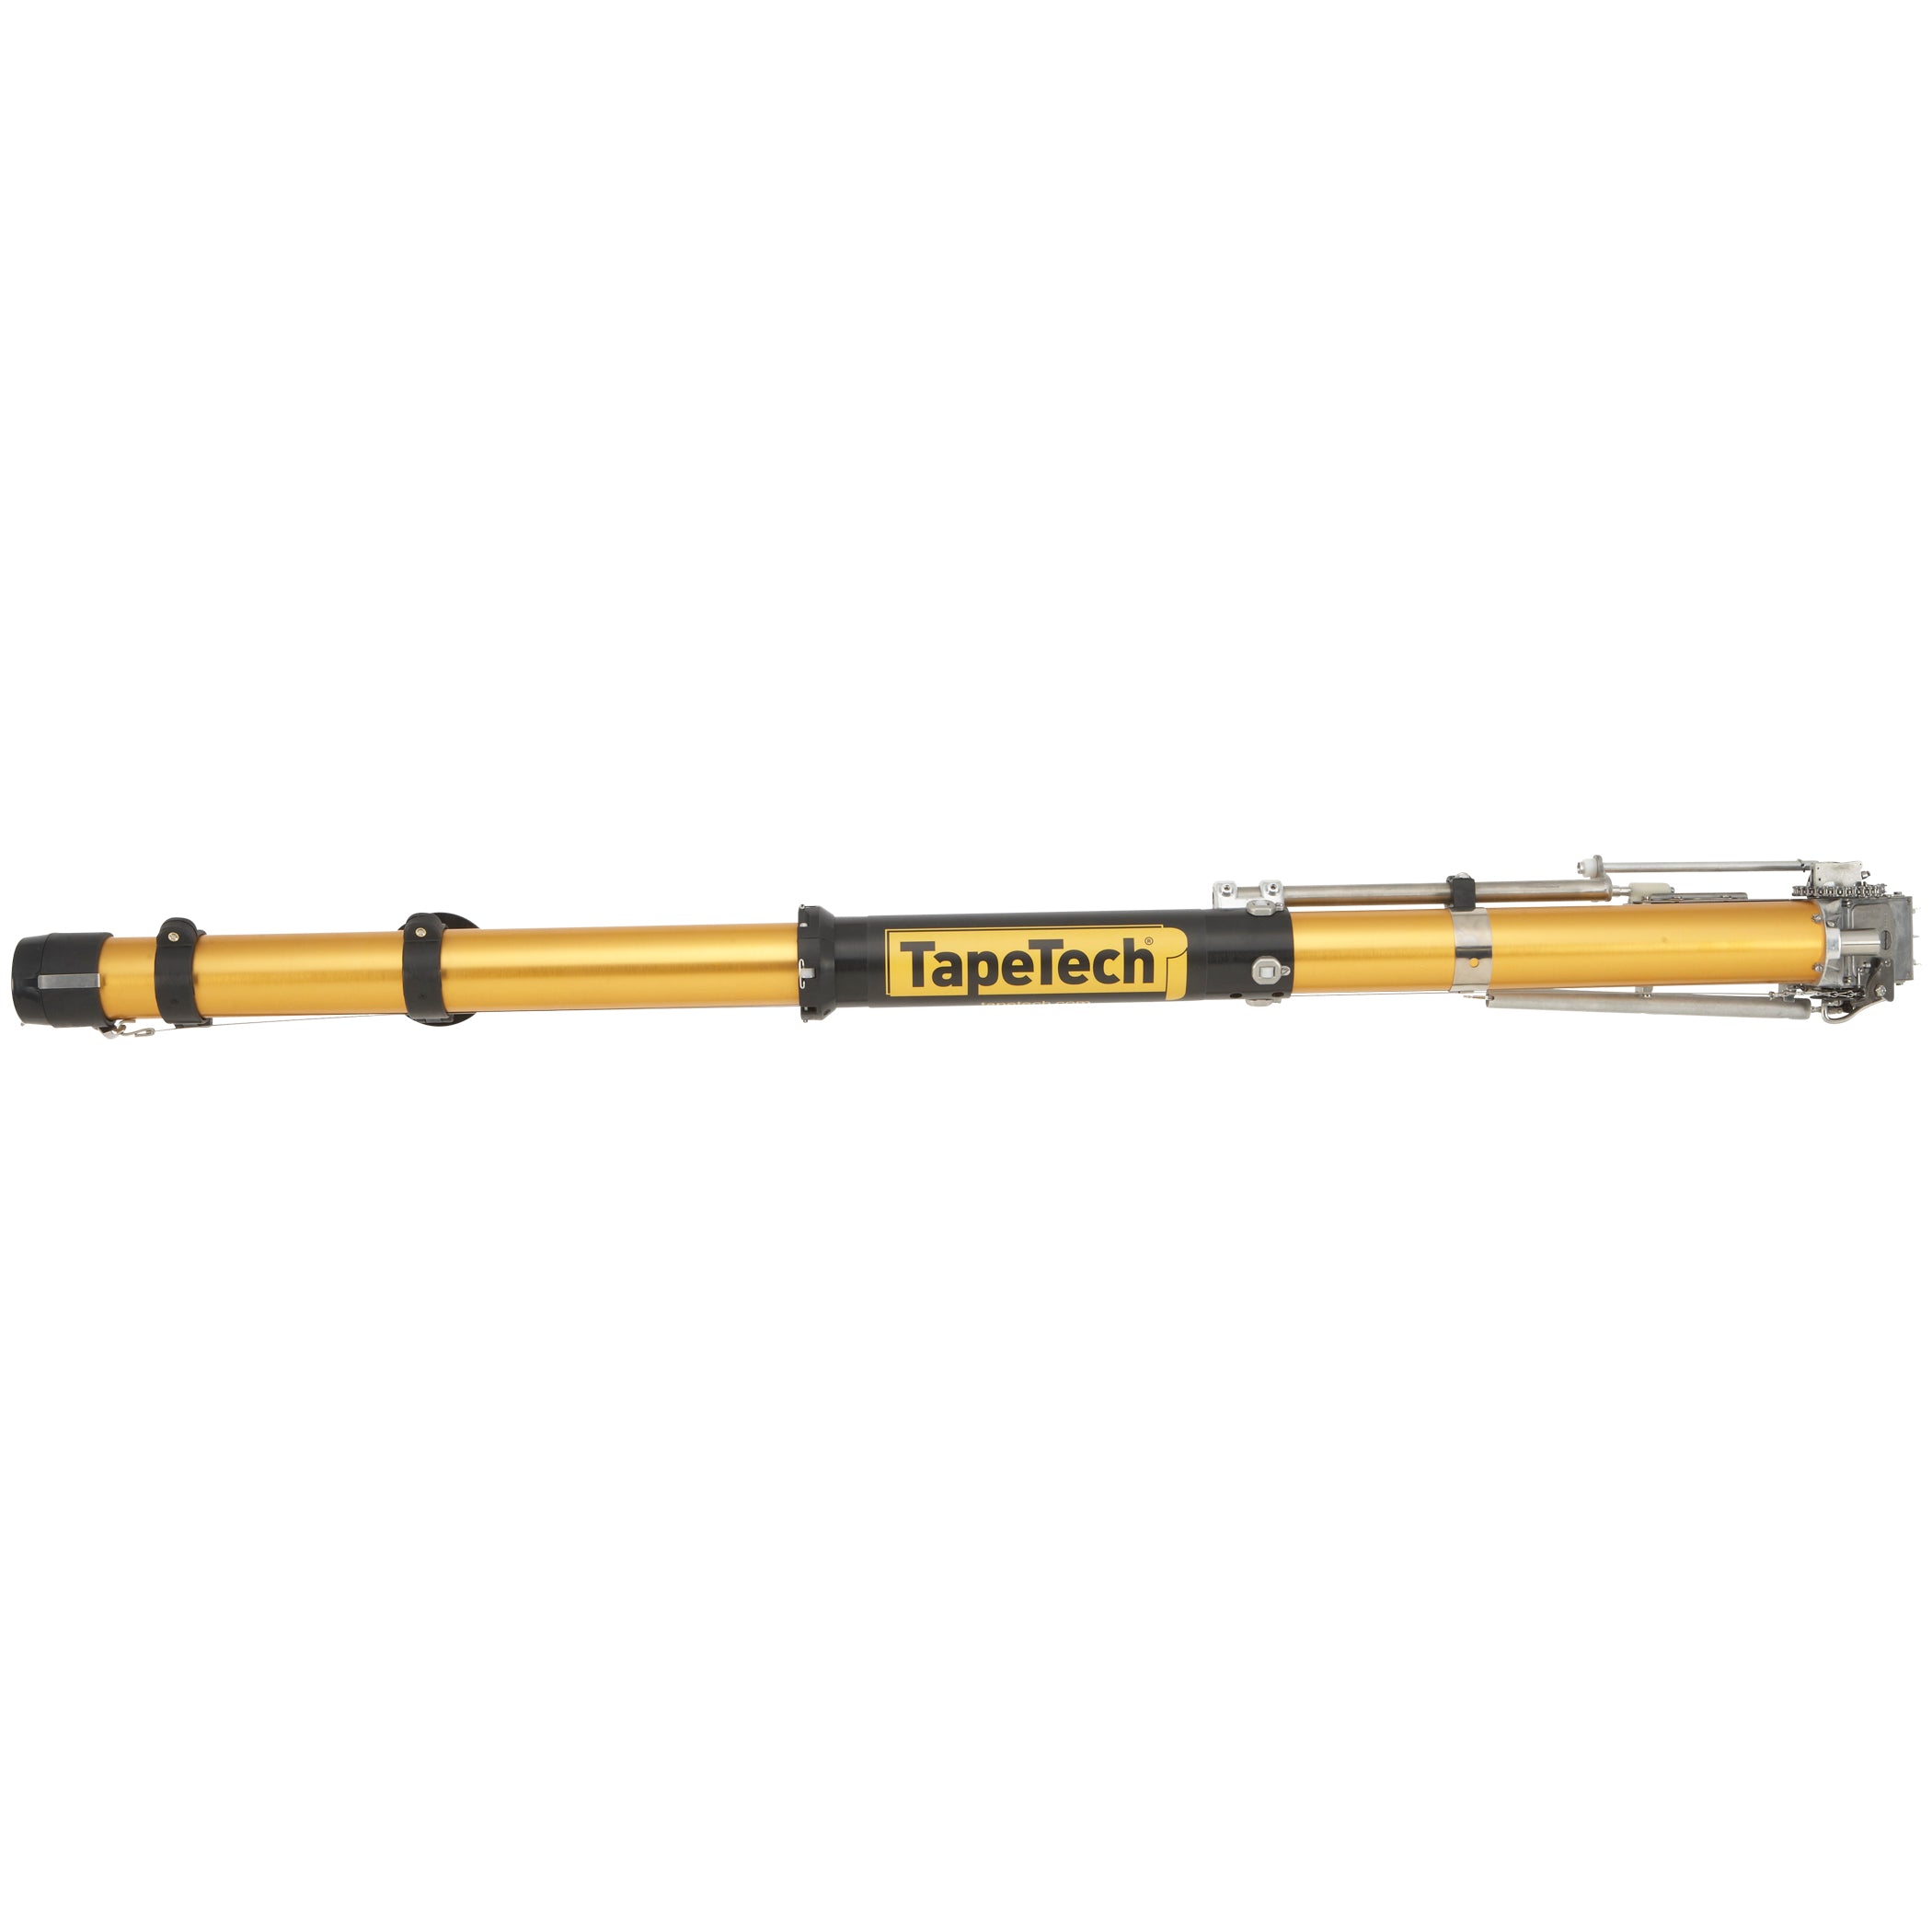 TapeTech EasyClean Automatic Taper